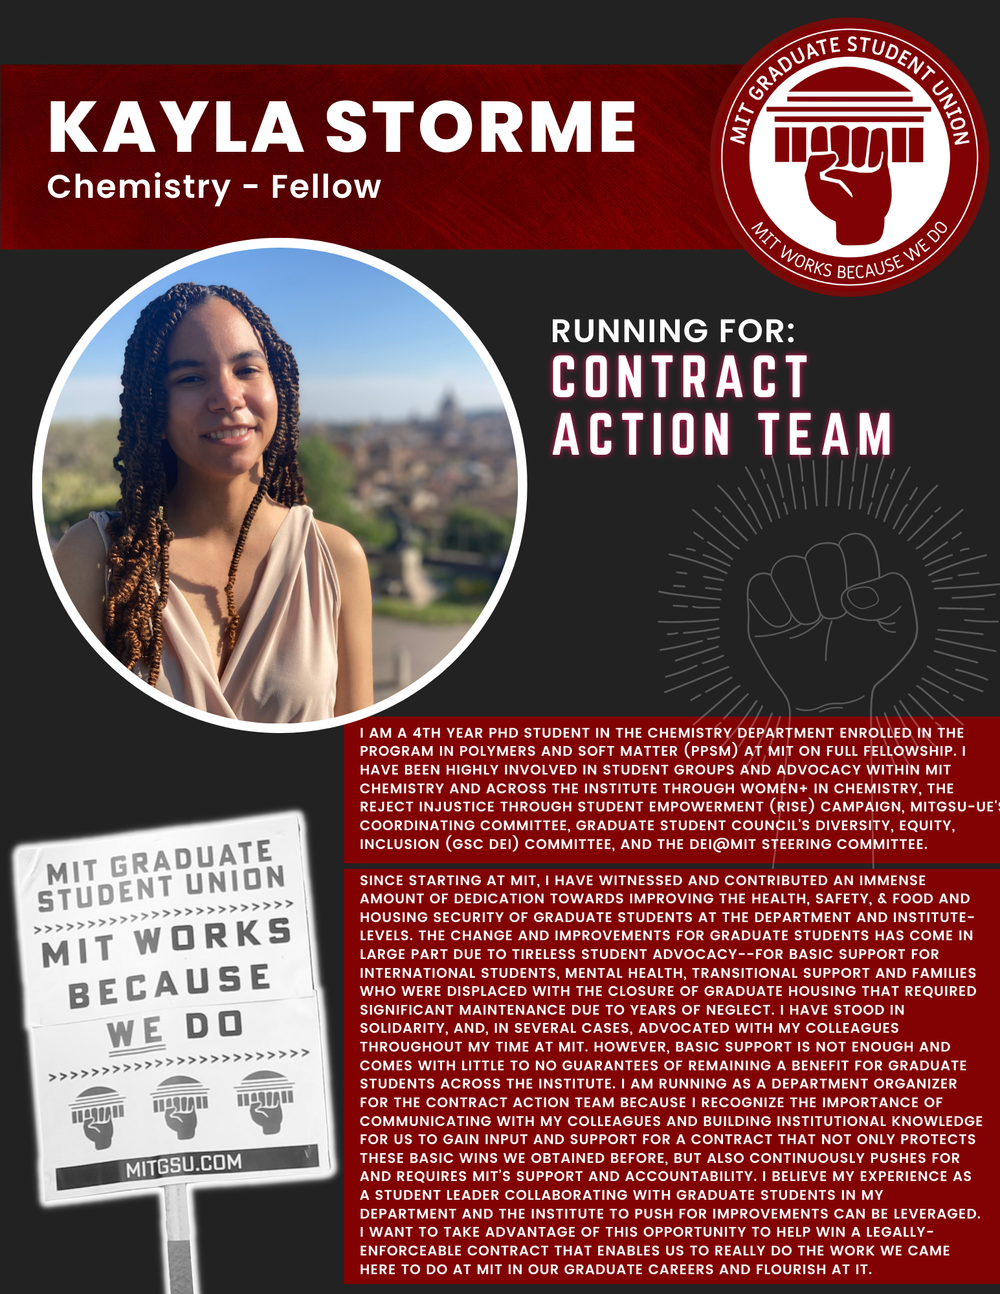  KAYLA STORME Chemistry - Fellow   RUNNING FOR: Contract Action Team  I AM A 4TH YEAR PHD STUDENT IN THE CHEMISTRY DEPARTMENT ENROLLED IN THE PROGRAM IN POLYMERS AND SOFT MATTER (PPSM) AT MIT ON FULL FELLOWSHIP. I HAVE BEEN HIGHLY INVOLVED IN STUDENT